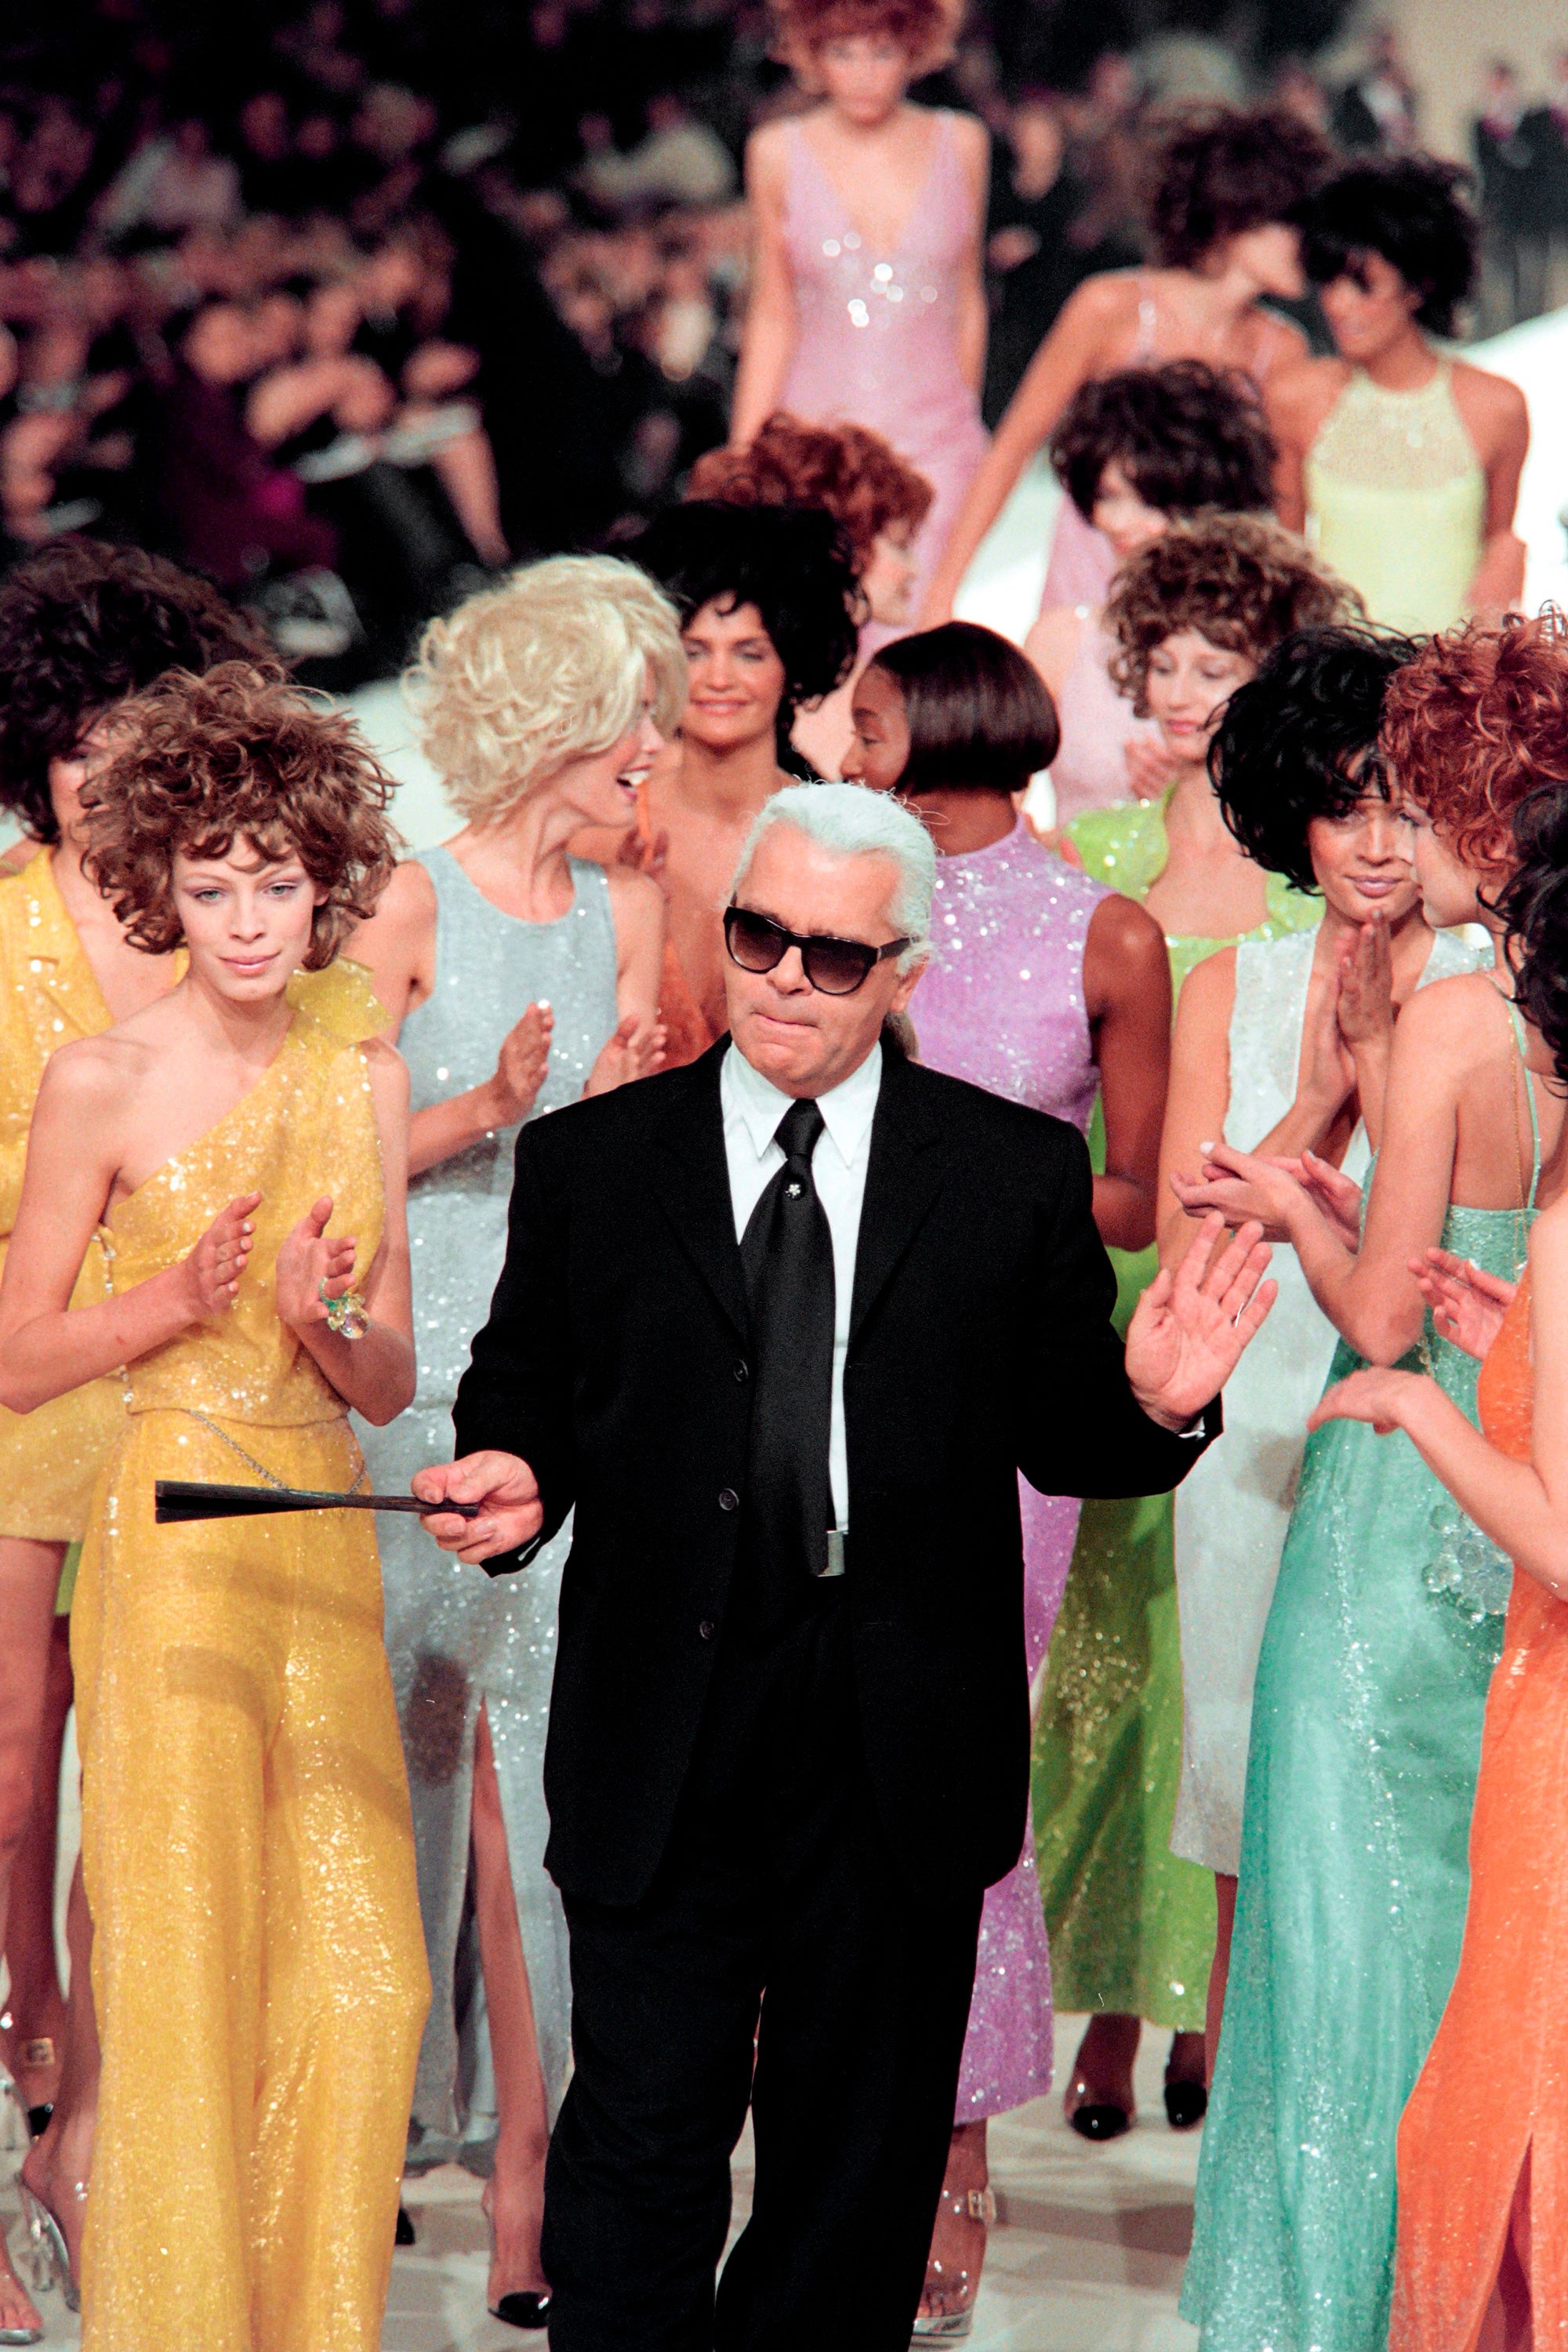 Chanel's '90s-inspired collection was an ode to Britney Spears